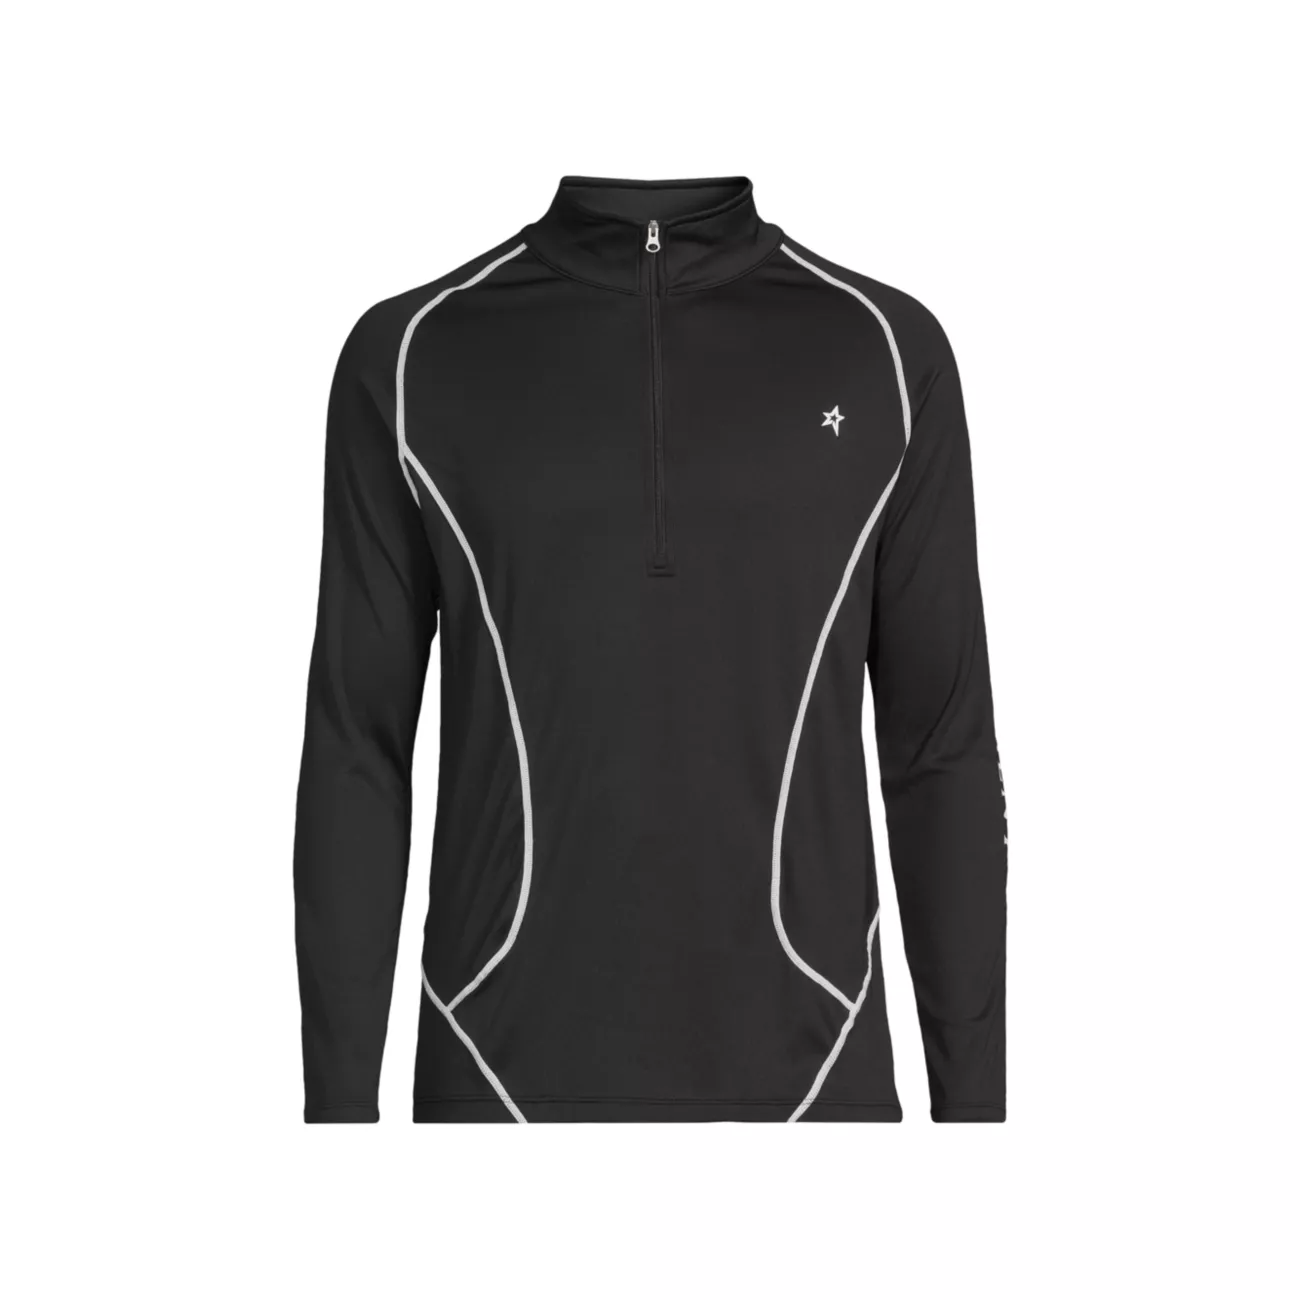 Base Layer Thermal Half-Zip Pullover Perfect Moment